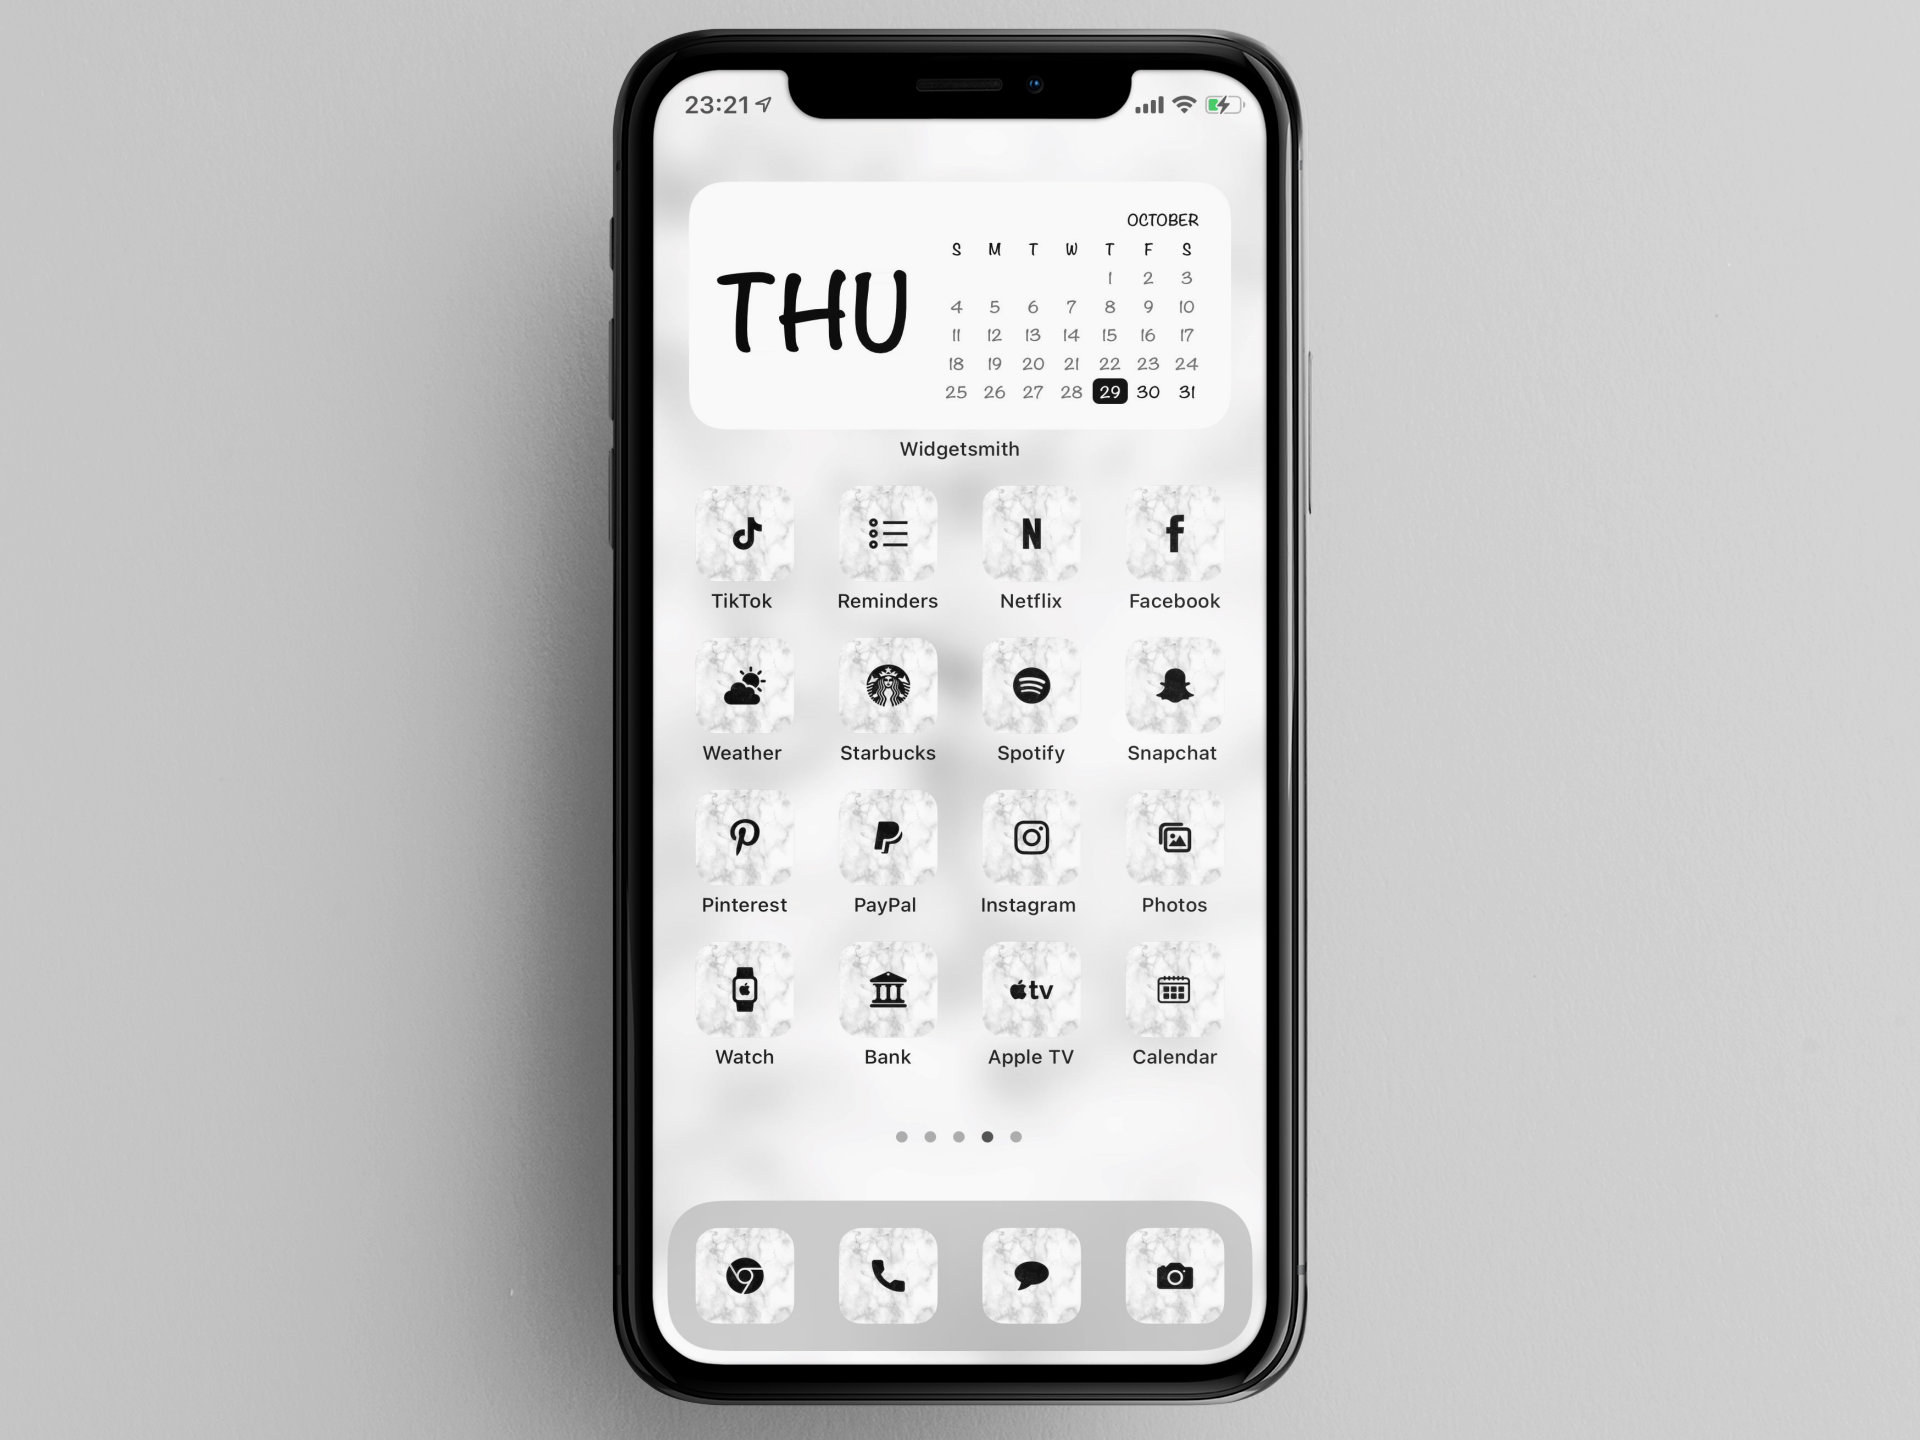 Louis Vuitton (Light) - Luxury iOS 14 Icons - 250+ Included